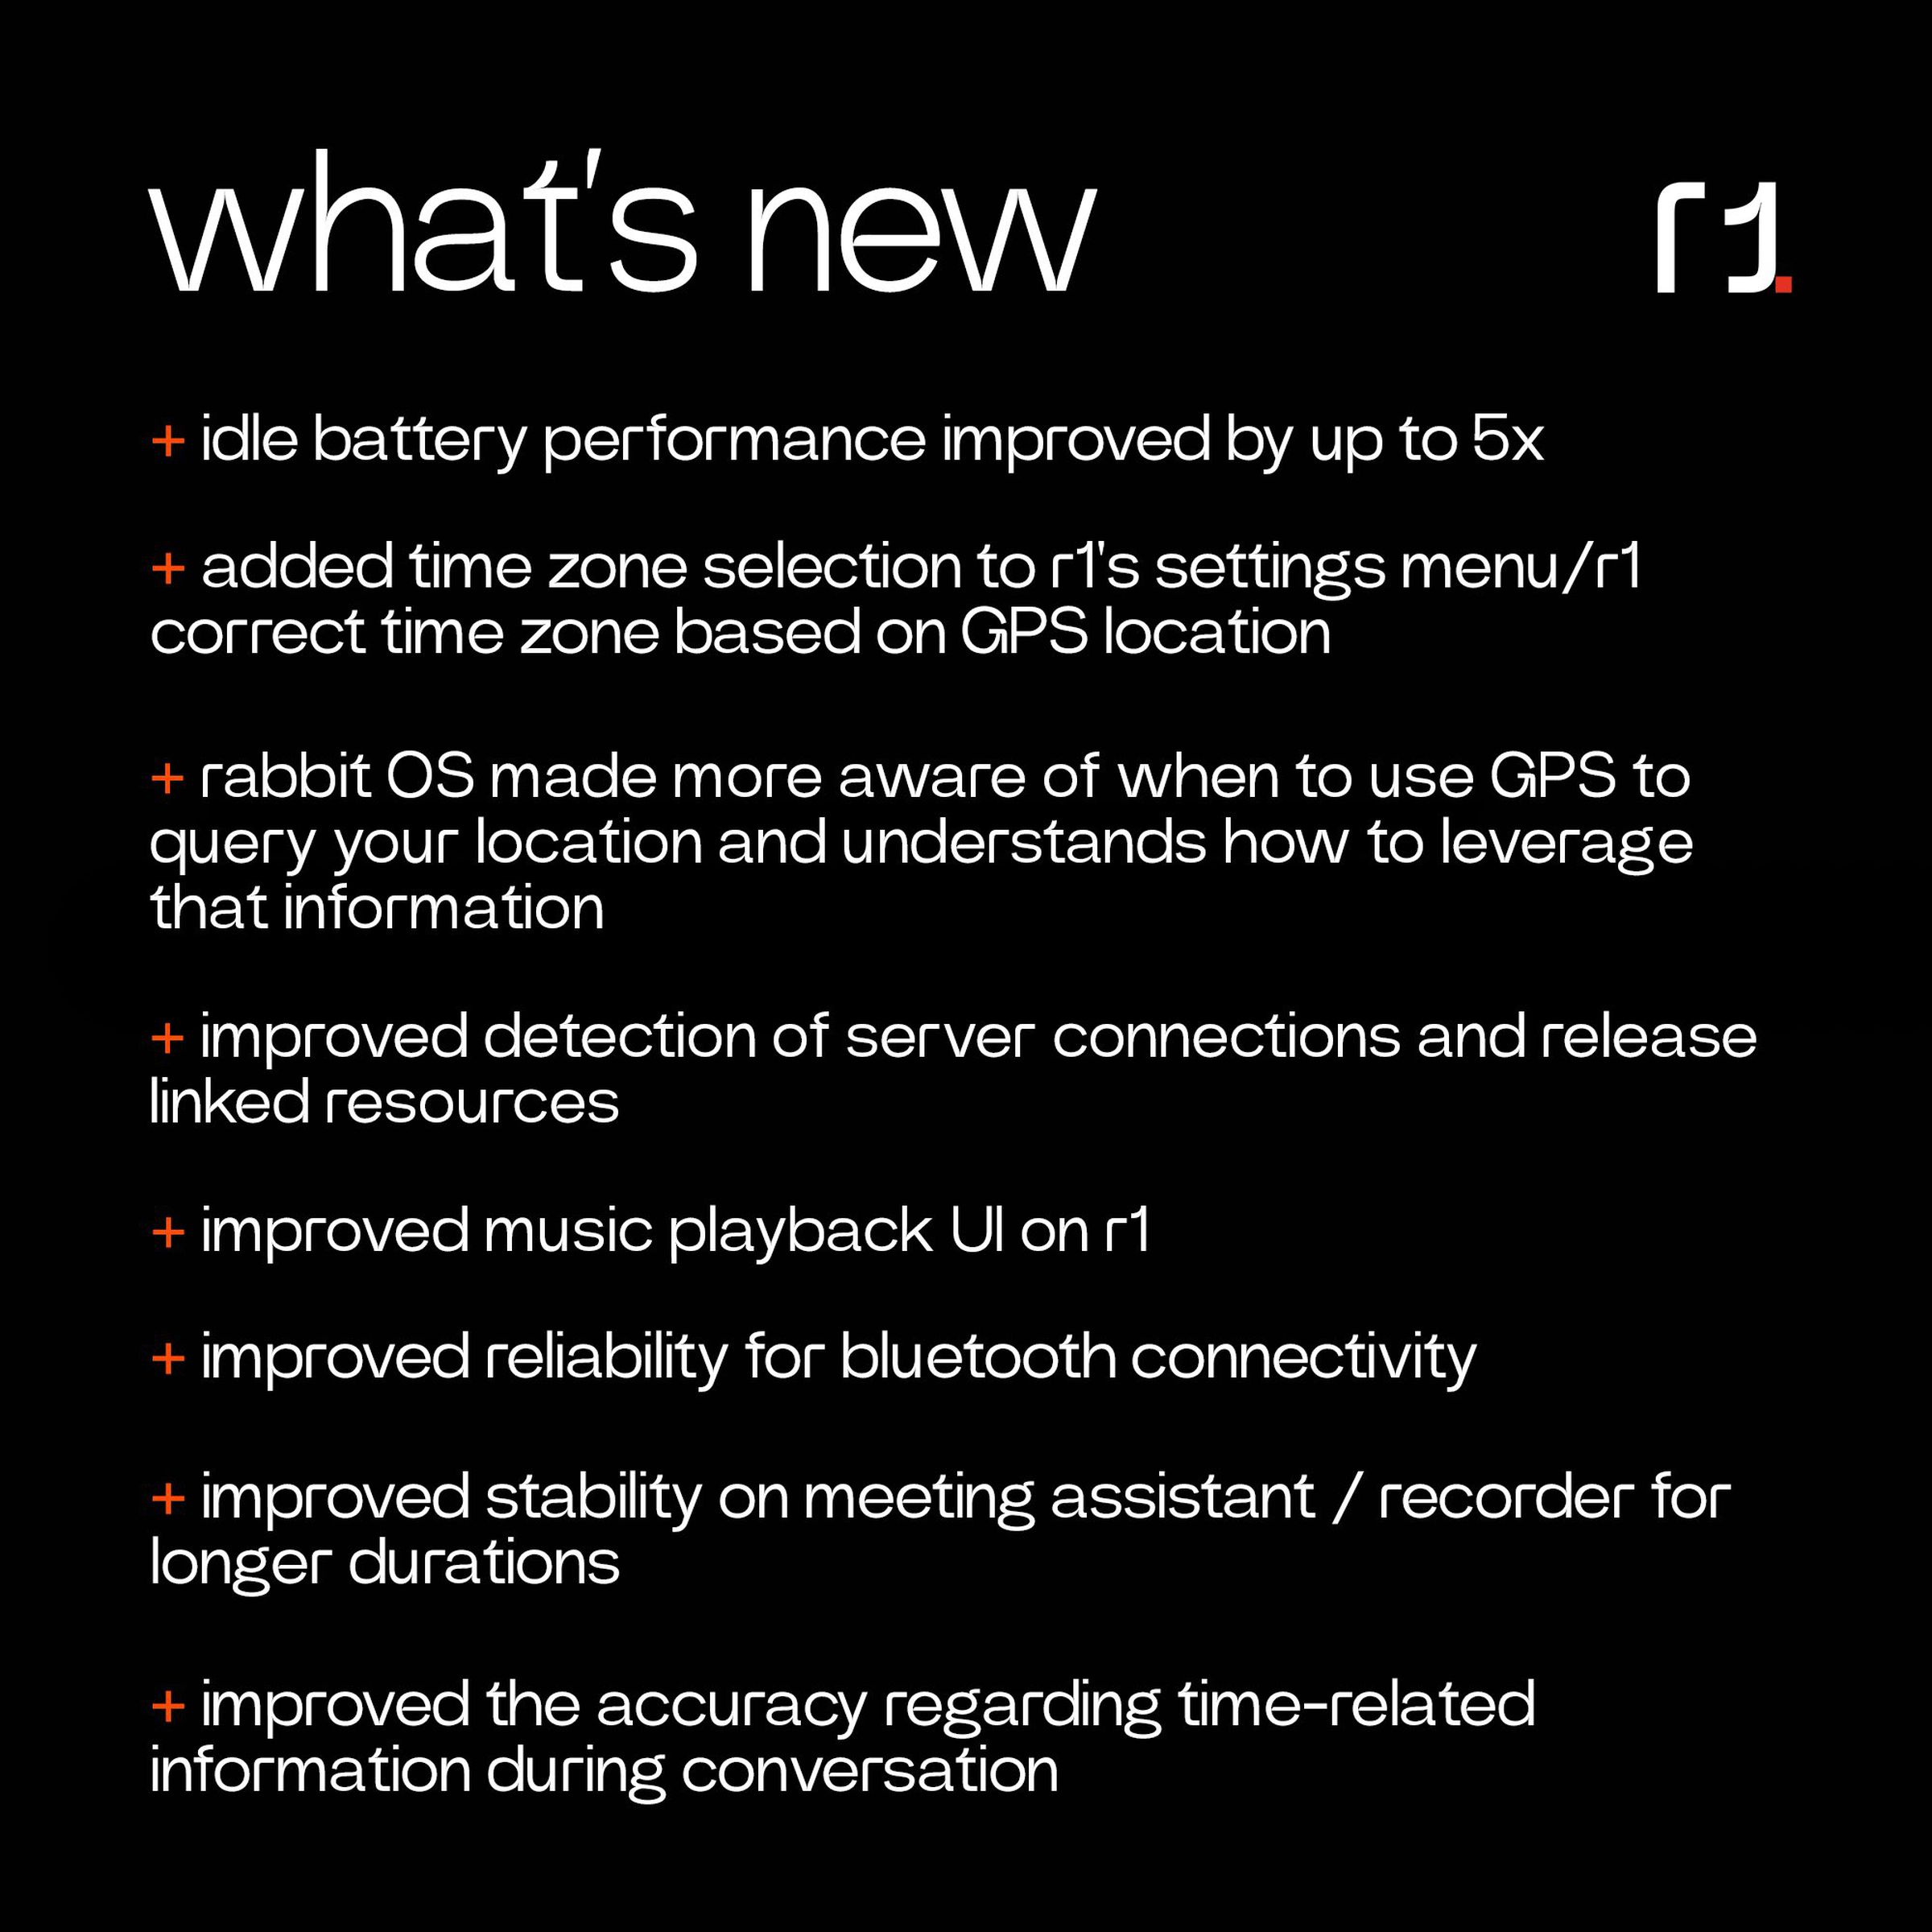 Screengrab showing R1 updates included in the OTA.